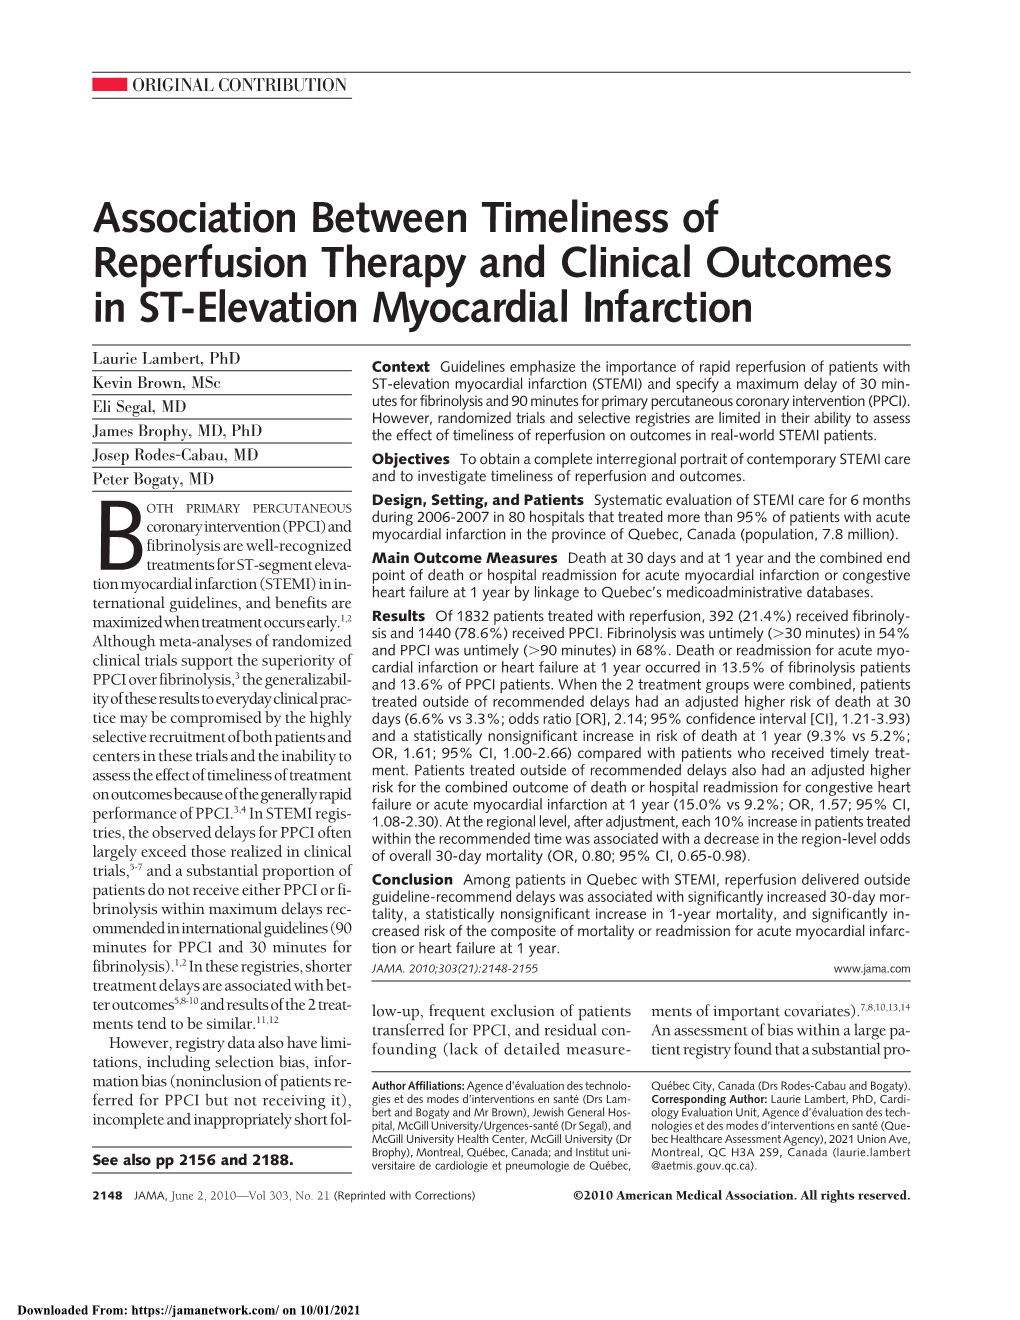 Association Between Timeliness of Reperfusion Therapy and Clinical Outcomes in ST-Elevation Myocardial Infarction